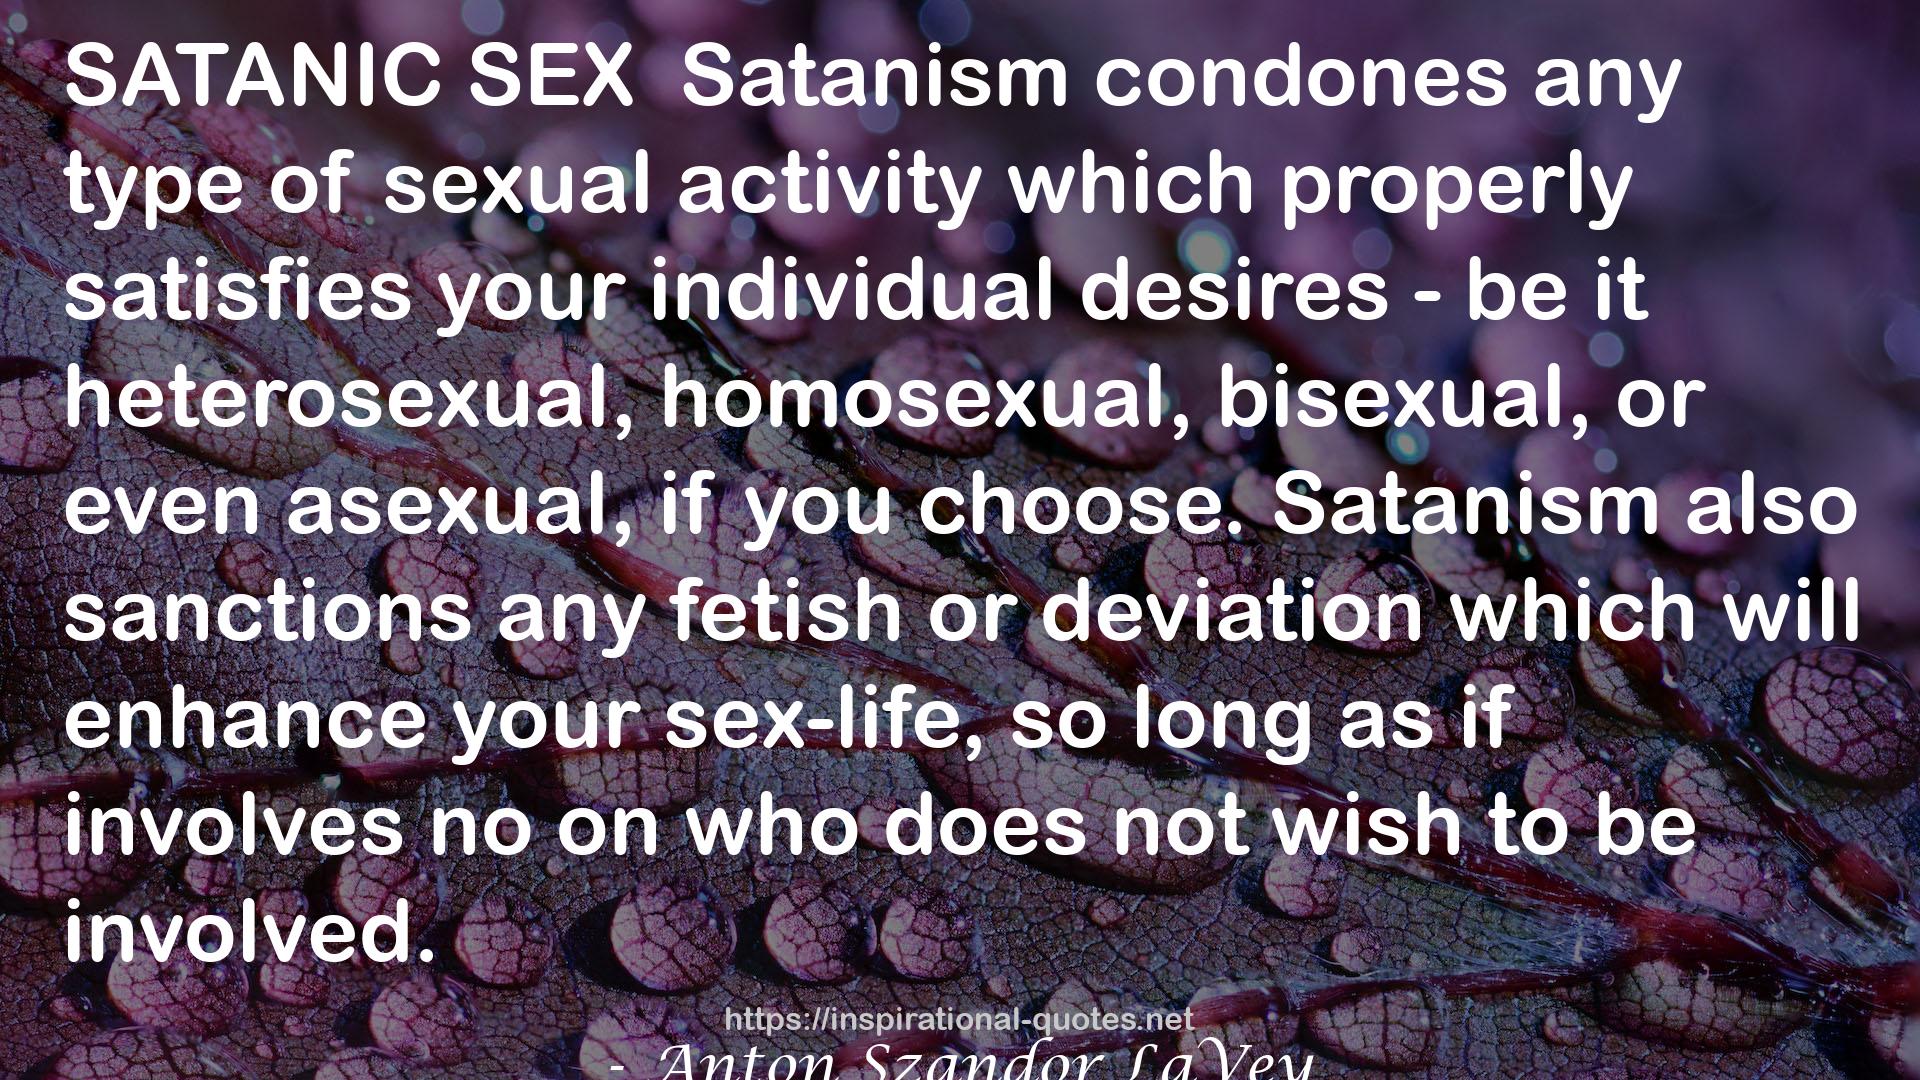 The Satanic Bible QUOTES